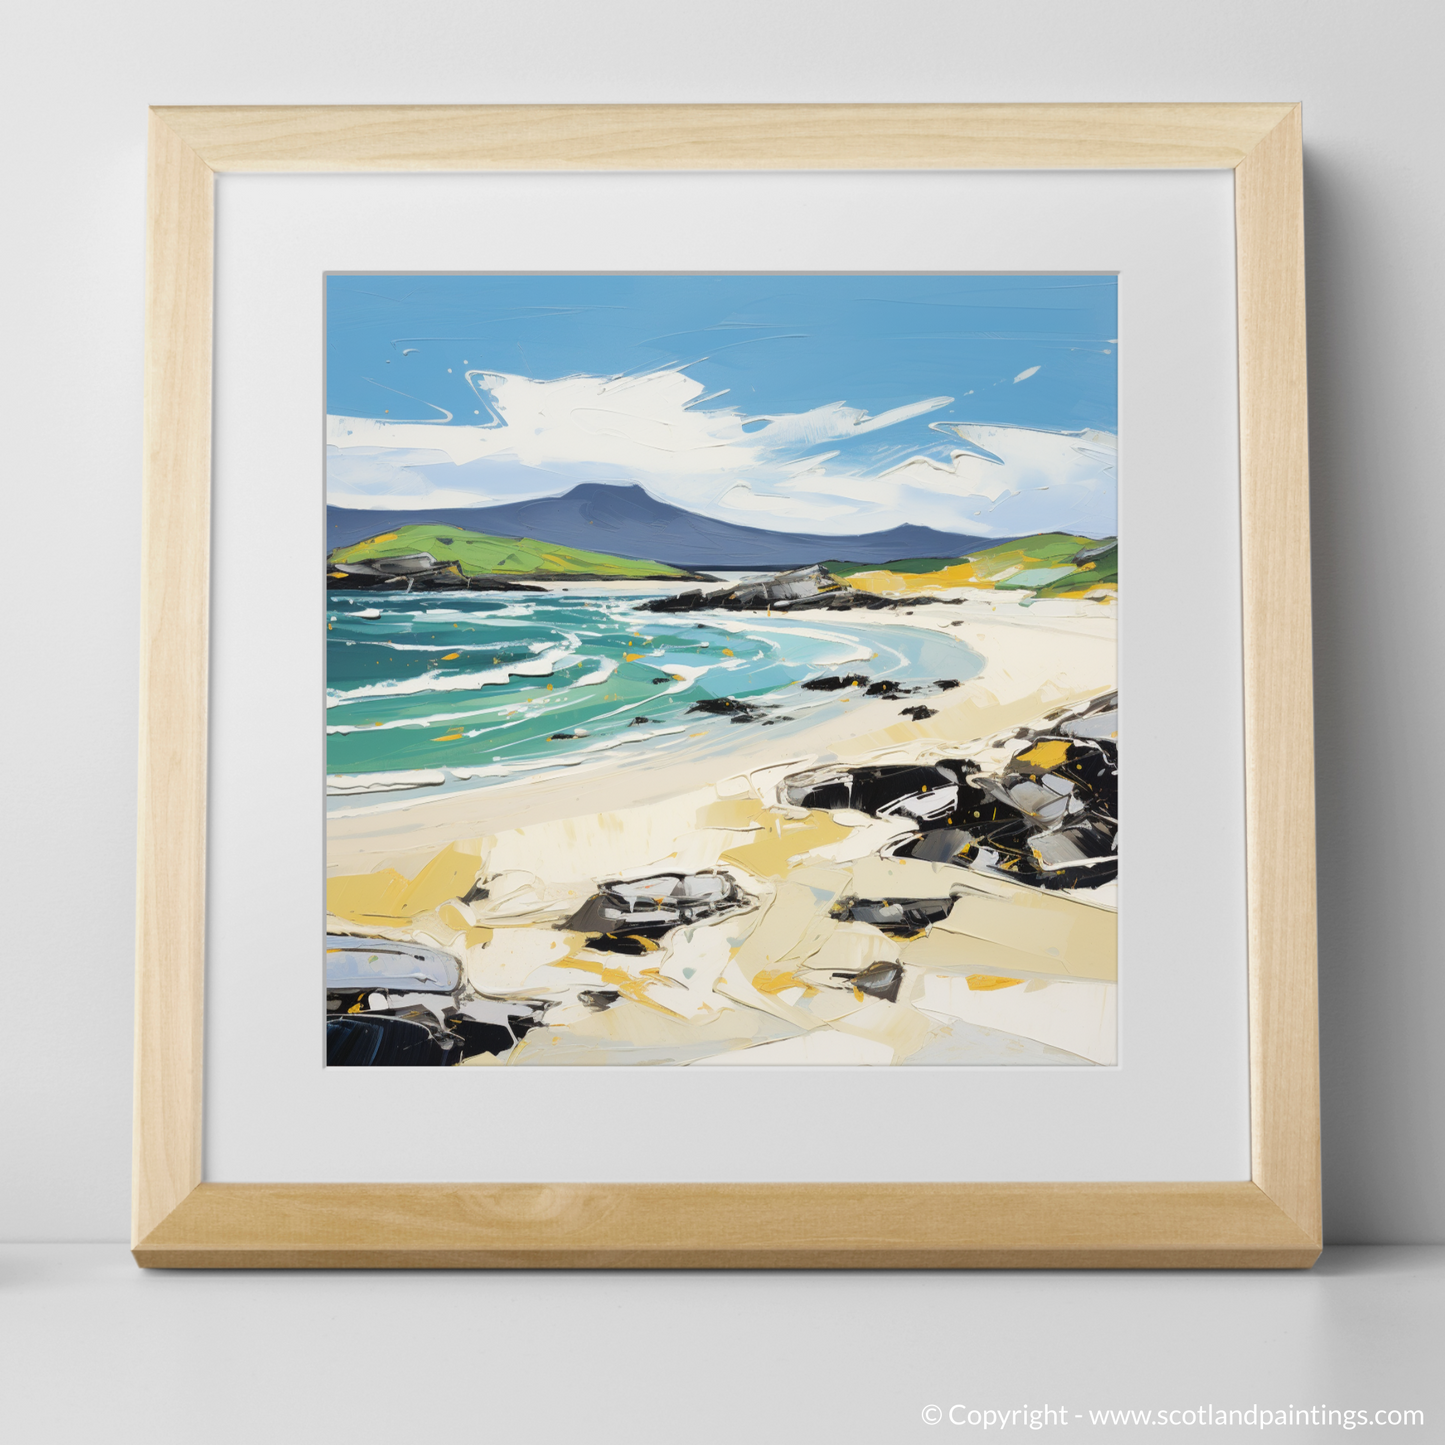 Art Print of Scarista Beach, Isle of Harris in summer with a natural frame